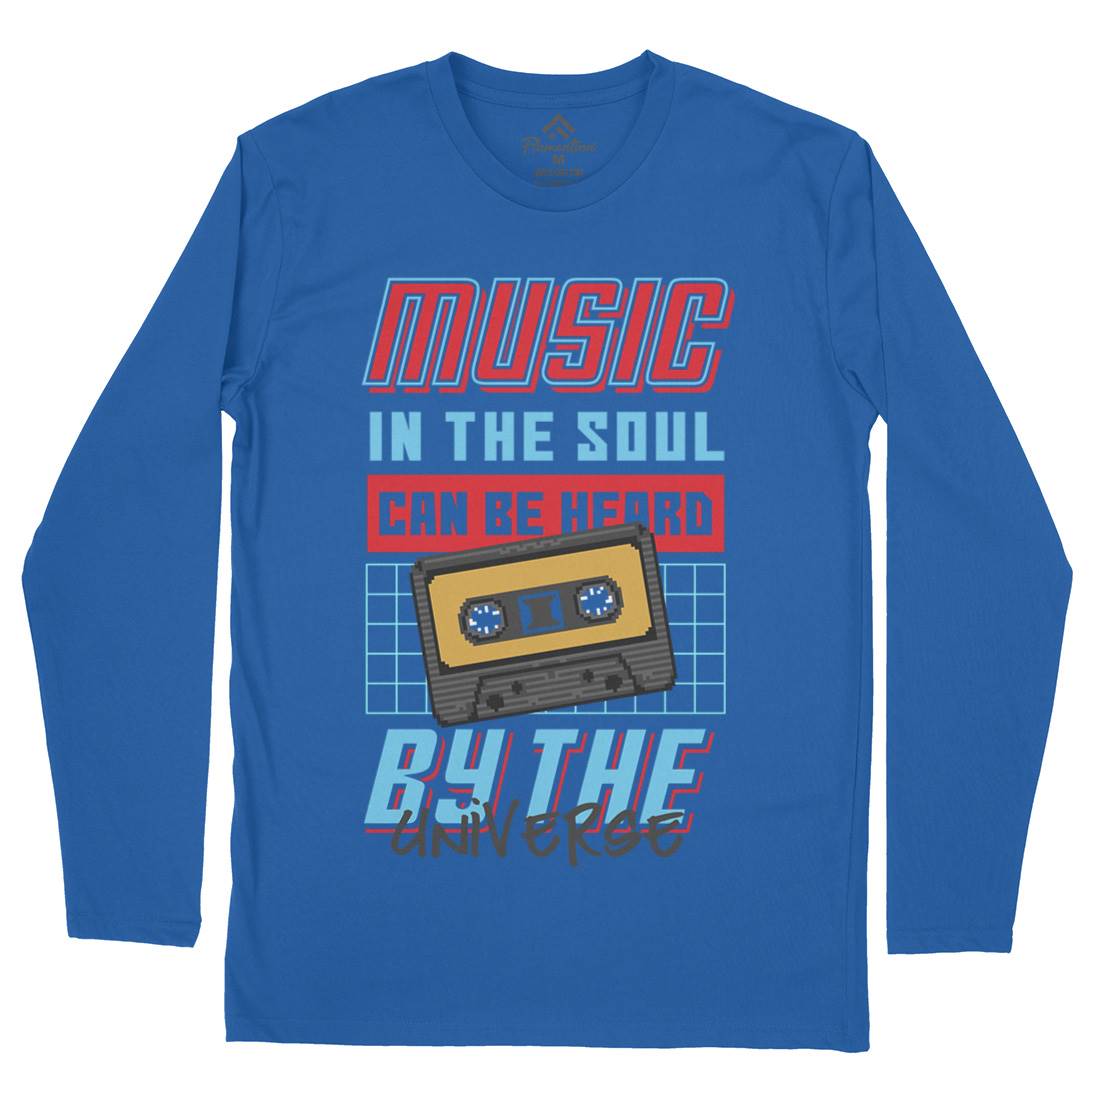 In The Soul Can Be Heard By The Universe Mens Long Sleeve T-Shirt Music B935